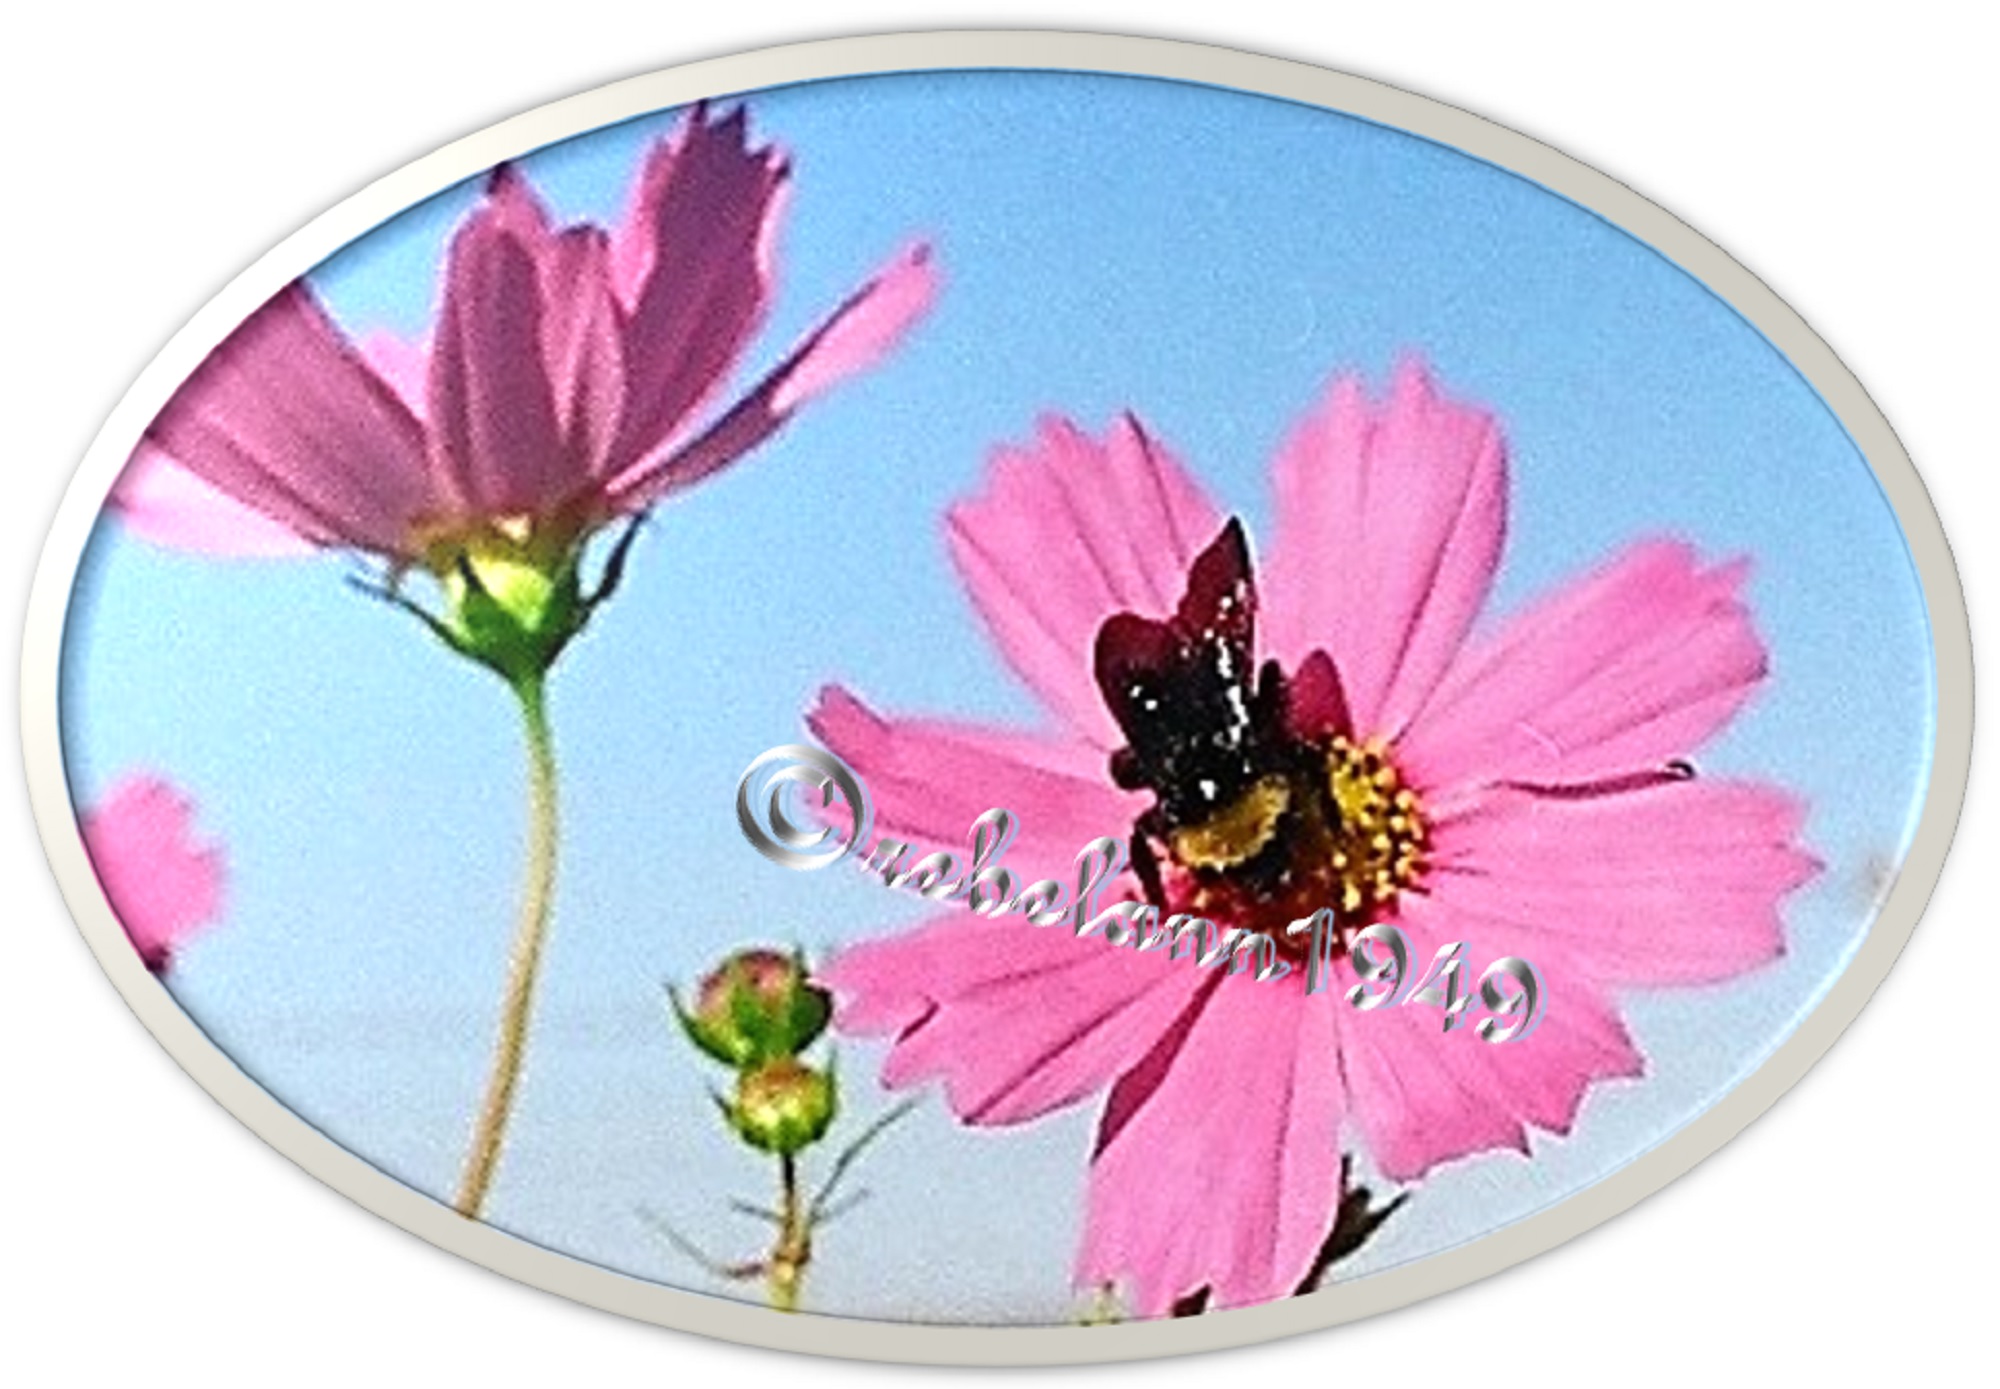 A beautiful bee on a cosmos flower, I took this way back in the late 1990s.